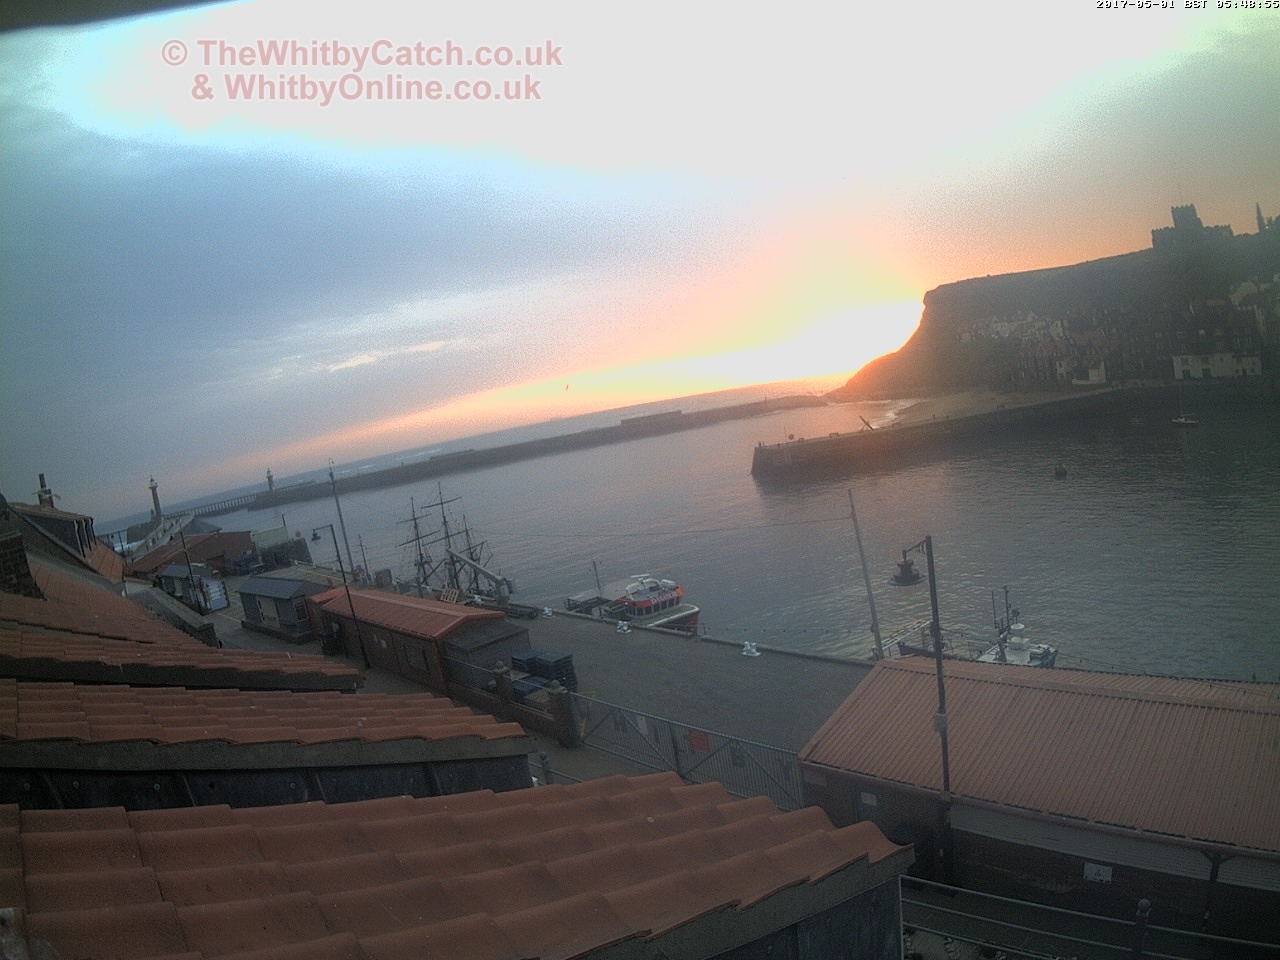 Whitby Mon 1st May 2017 05:49.